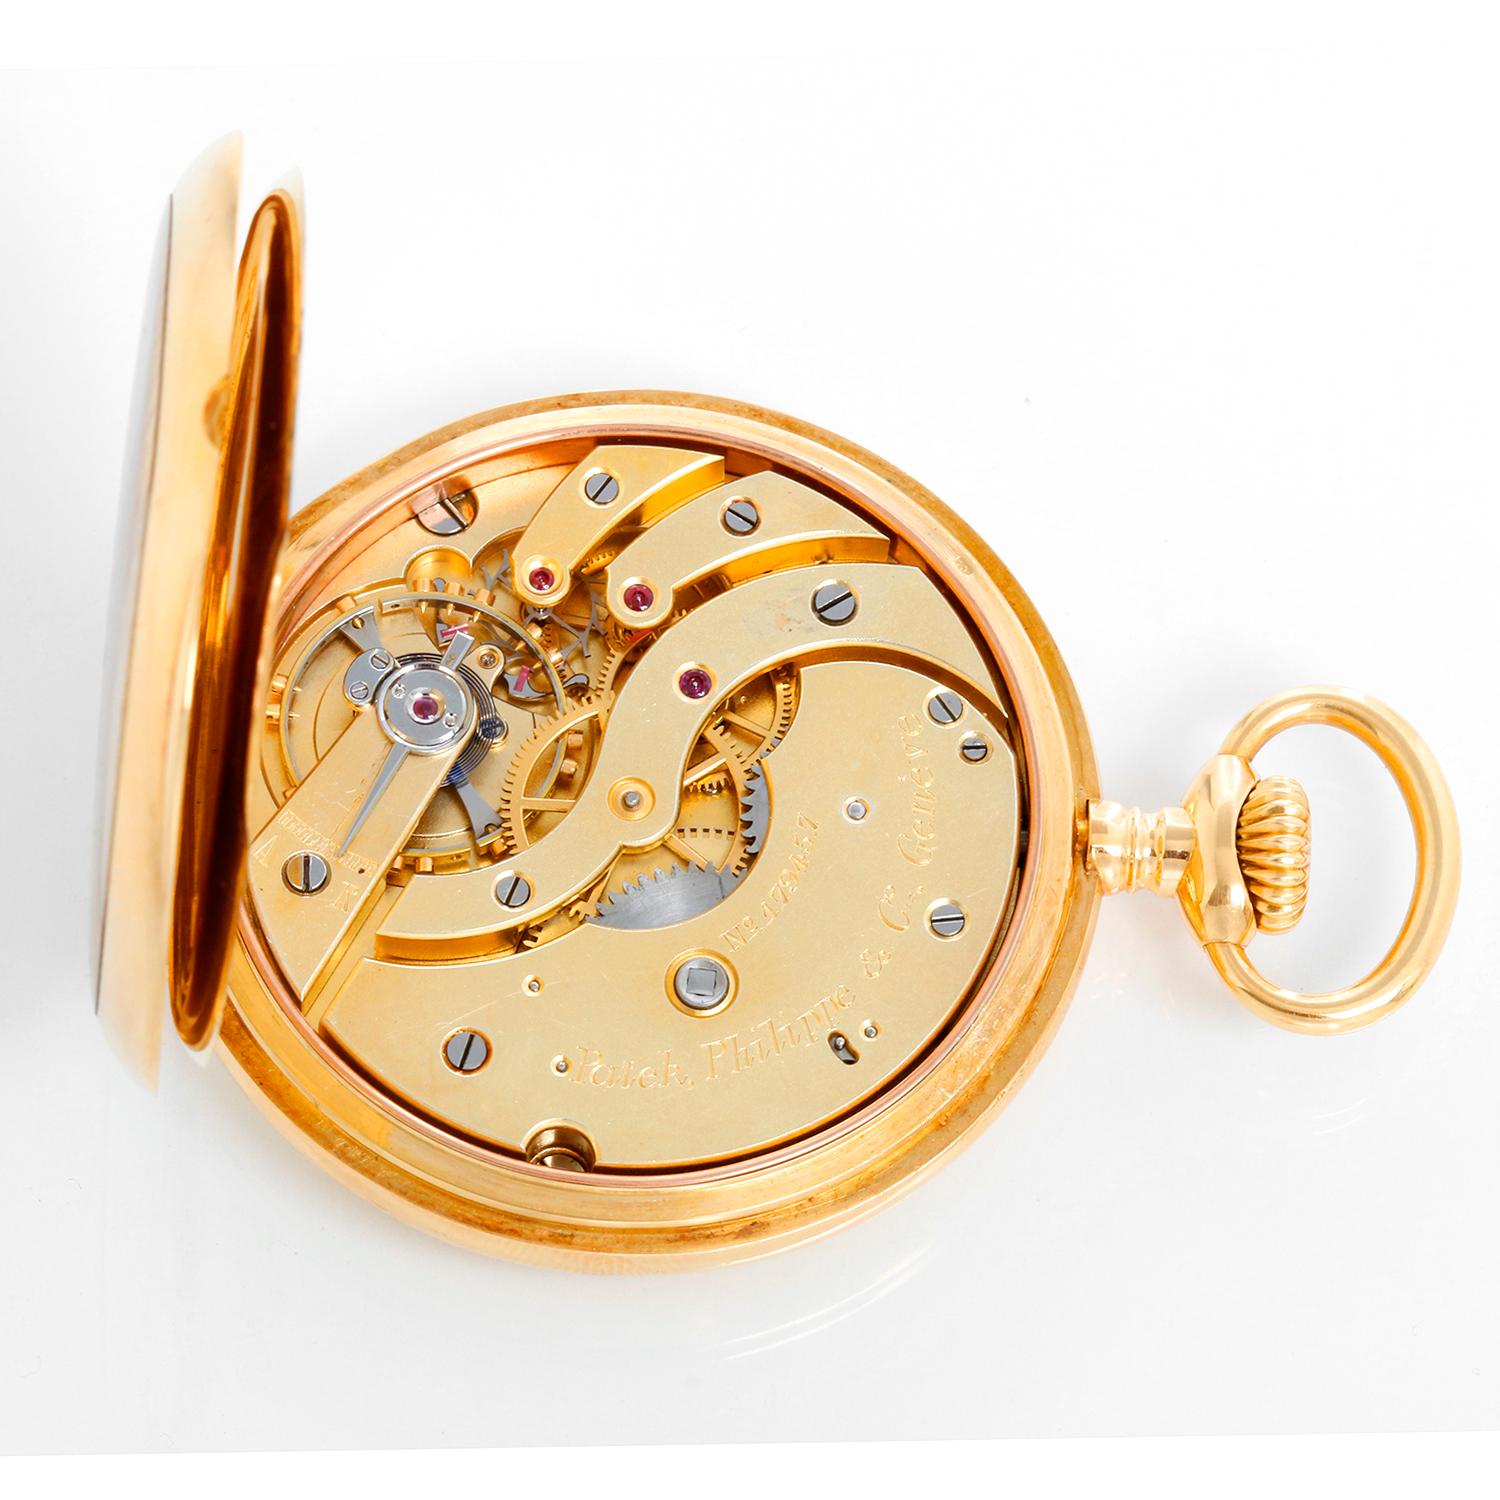 Patek Philippe 18K Hunting Case Roman Numerals Pocket Watch In Excellent Condition For Sale In Dallas, TX